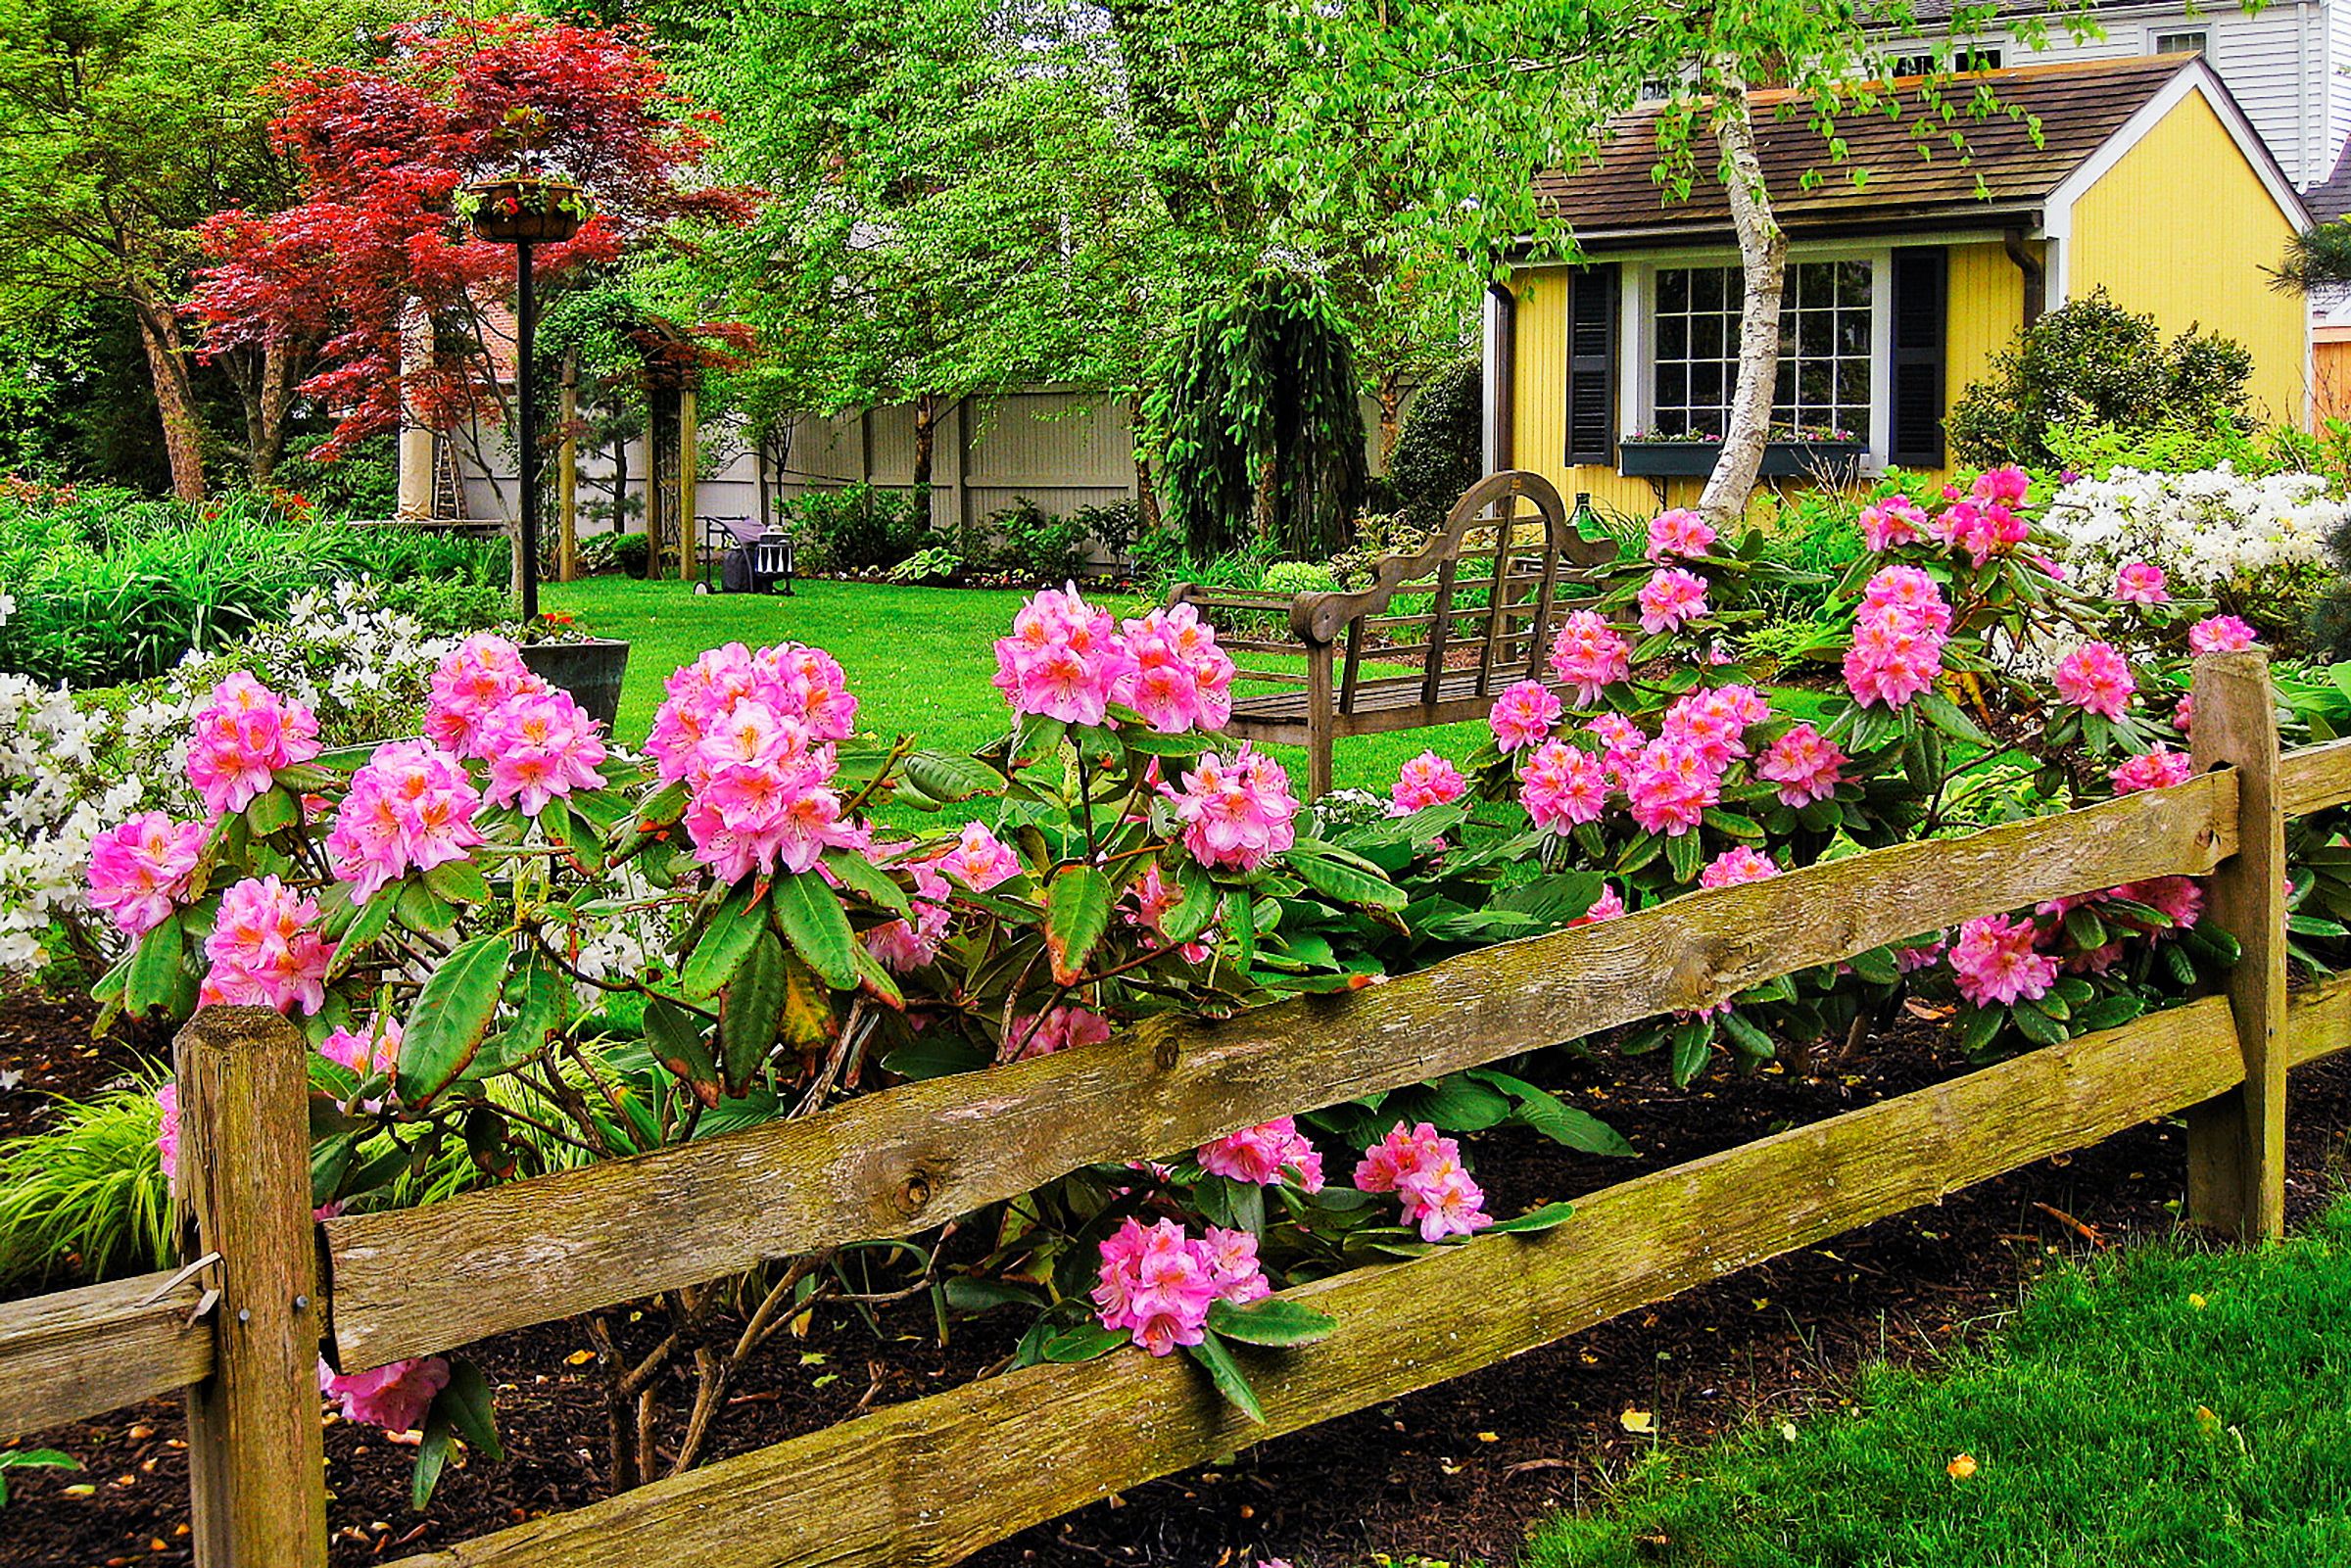 From Blah Lawn to Backyard Rose Garden Paradise - This Old House